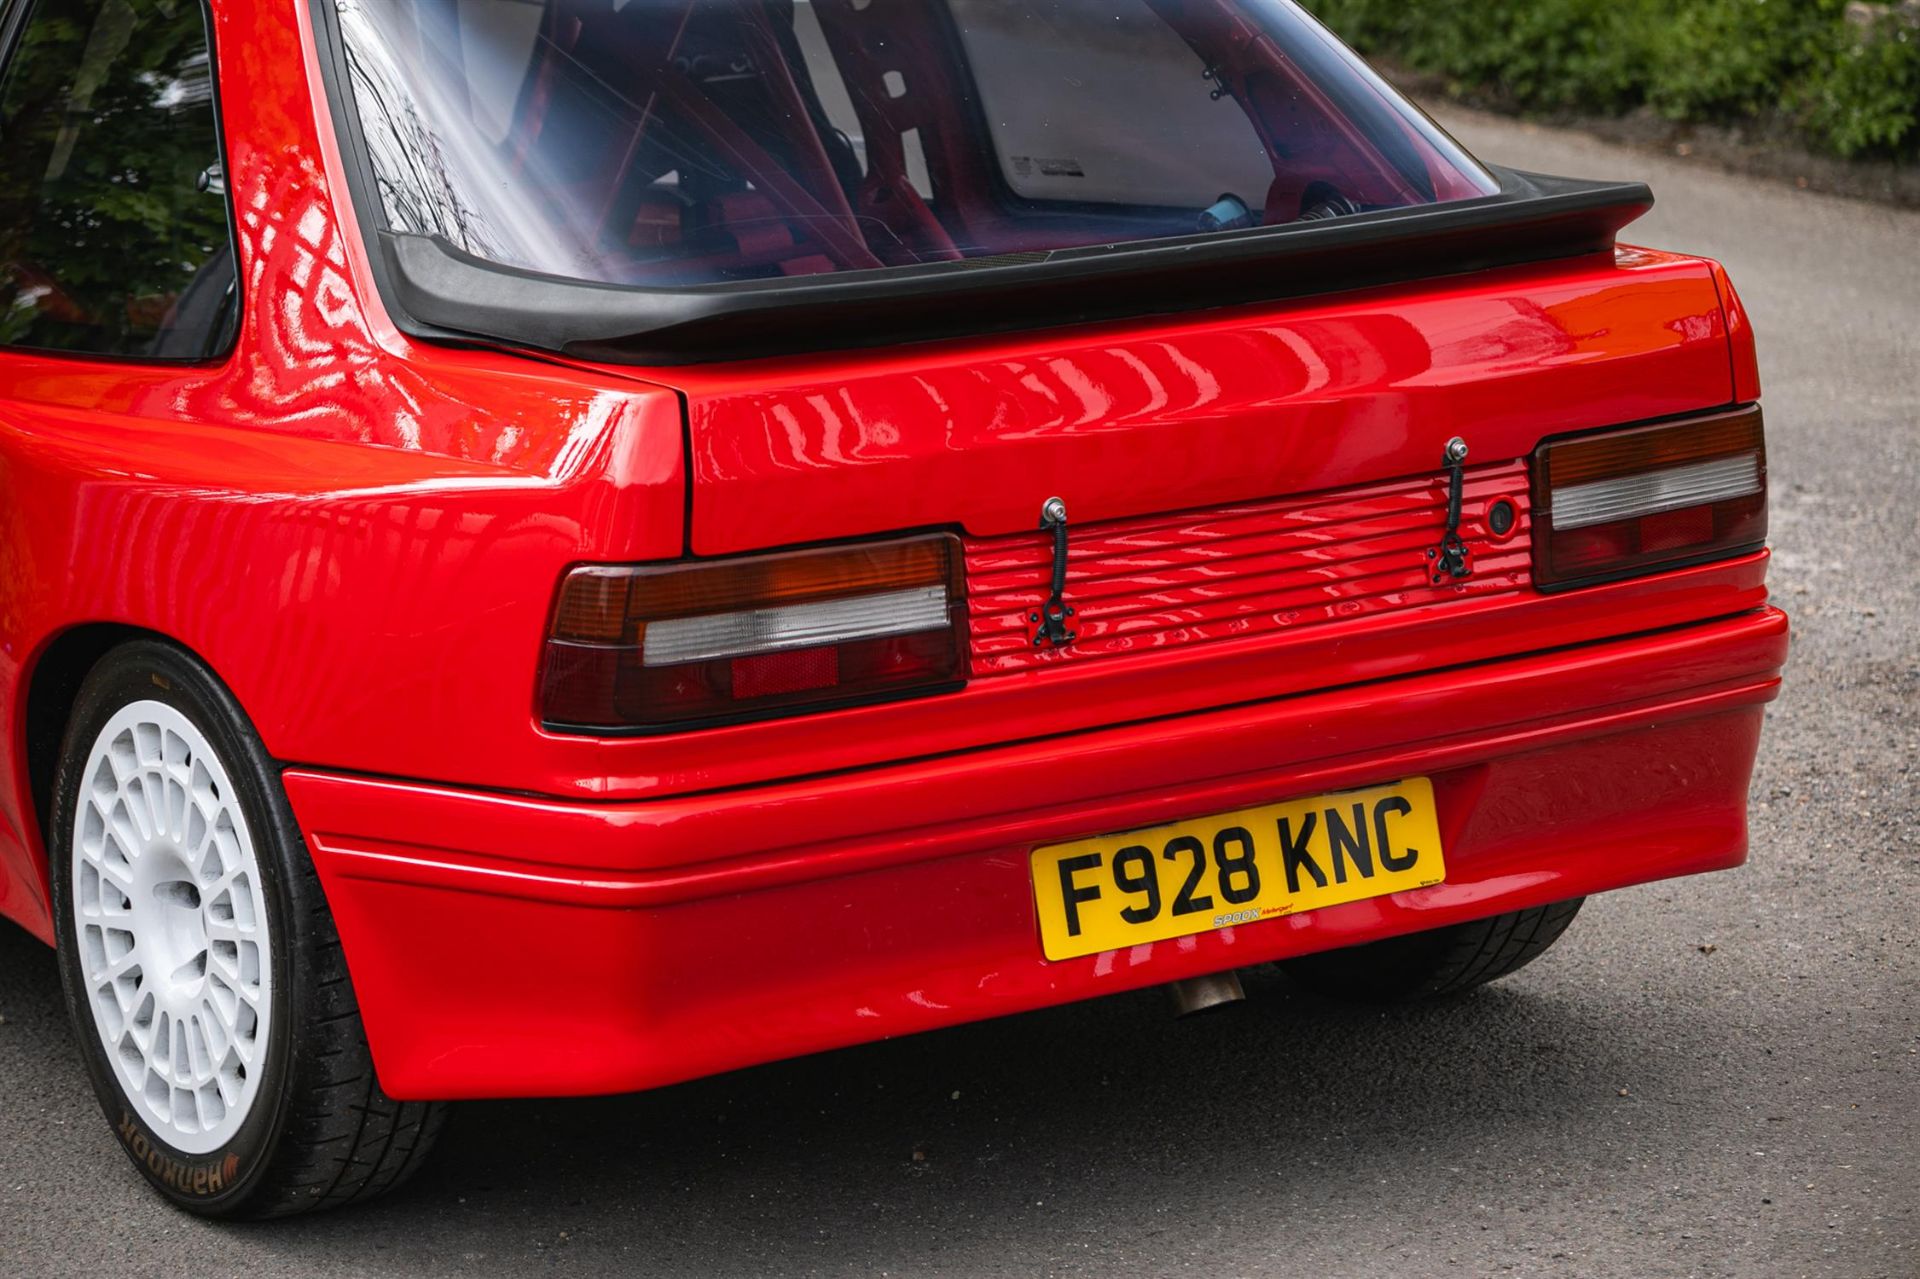 1988 Peugeot 309 GTi 16v Supercharged 'Maxi' Rally Special - Image 9 of 10